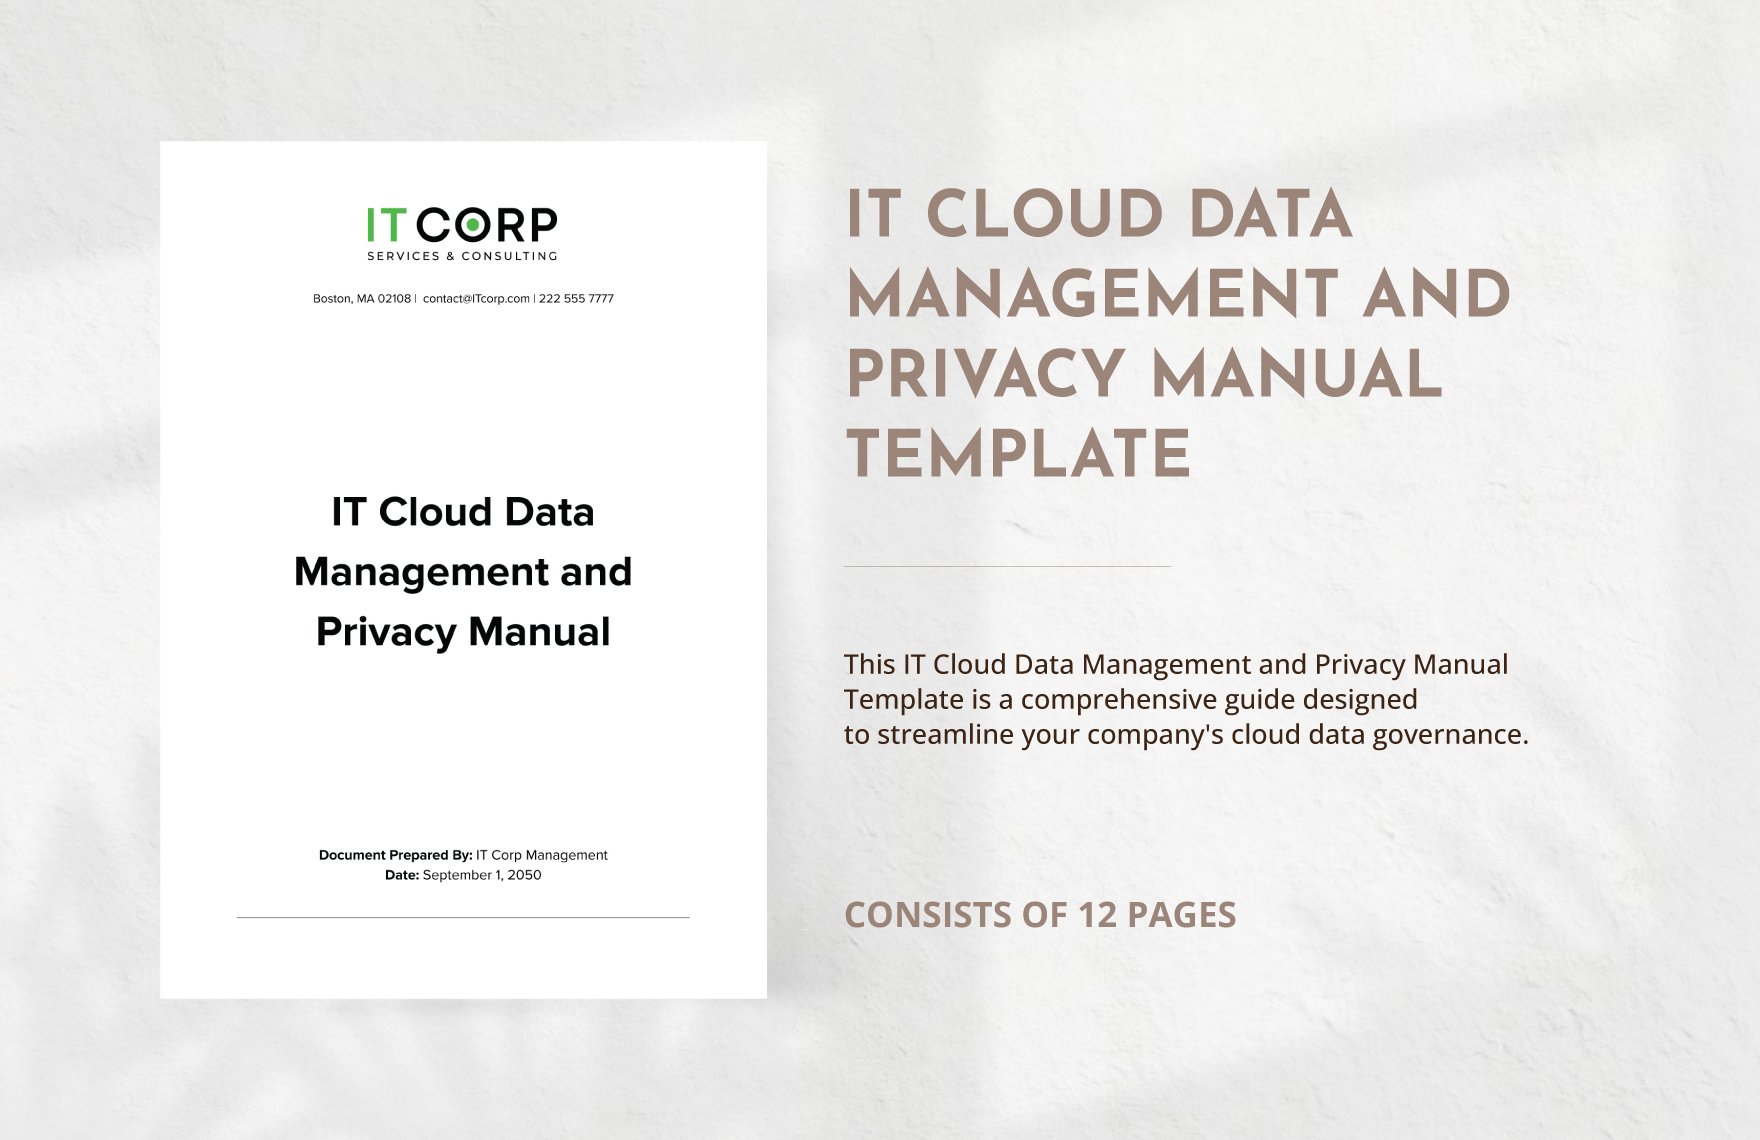 IT Cloud Data Management and Privacy Manual Template in Word, Google Docs, PDF